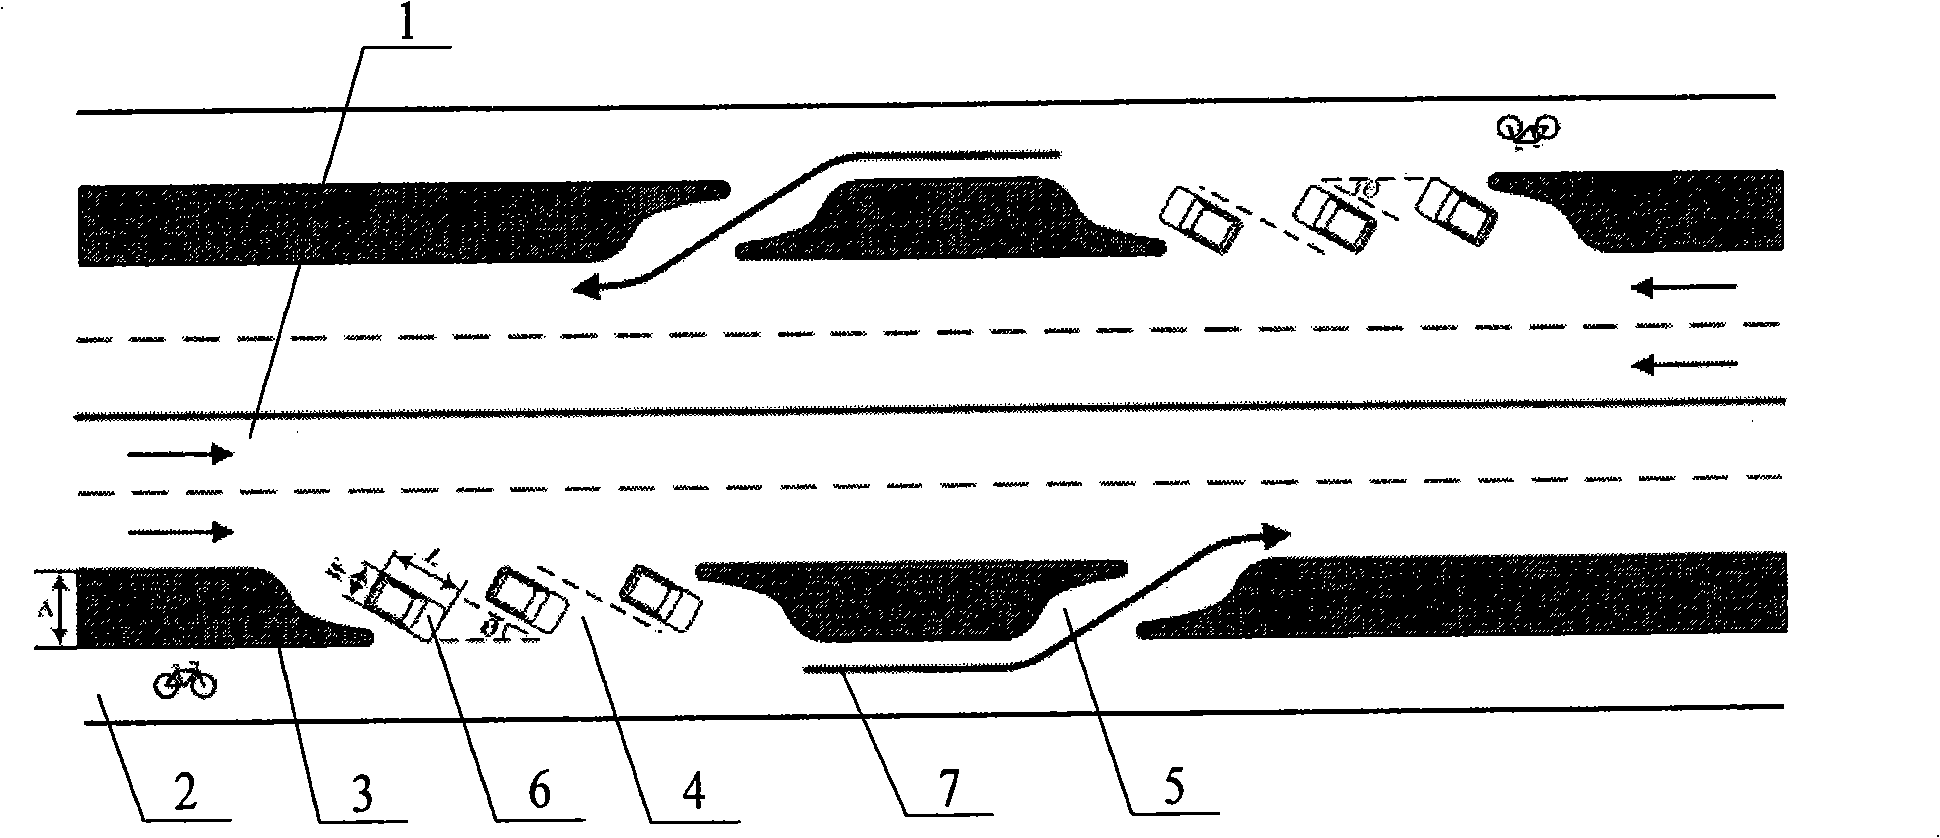 Control method for setting temporary stop area for automobile by vehicle-bicycle separation zone